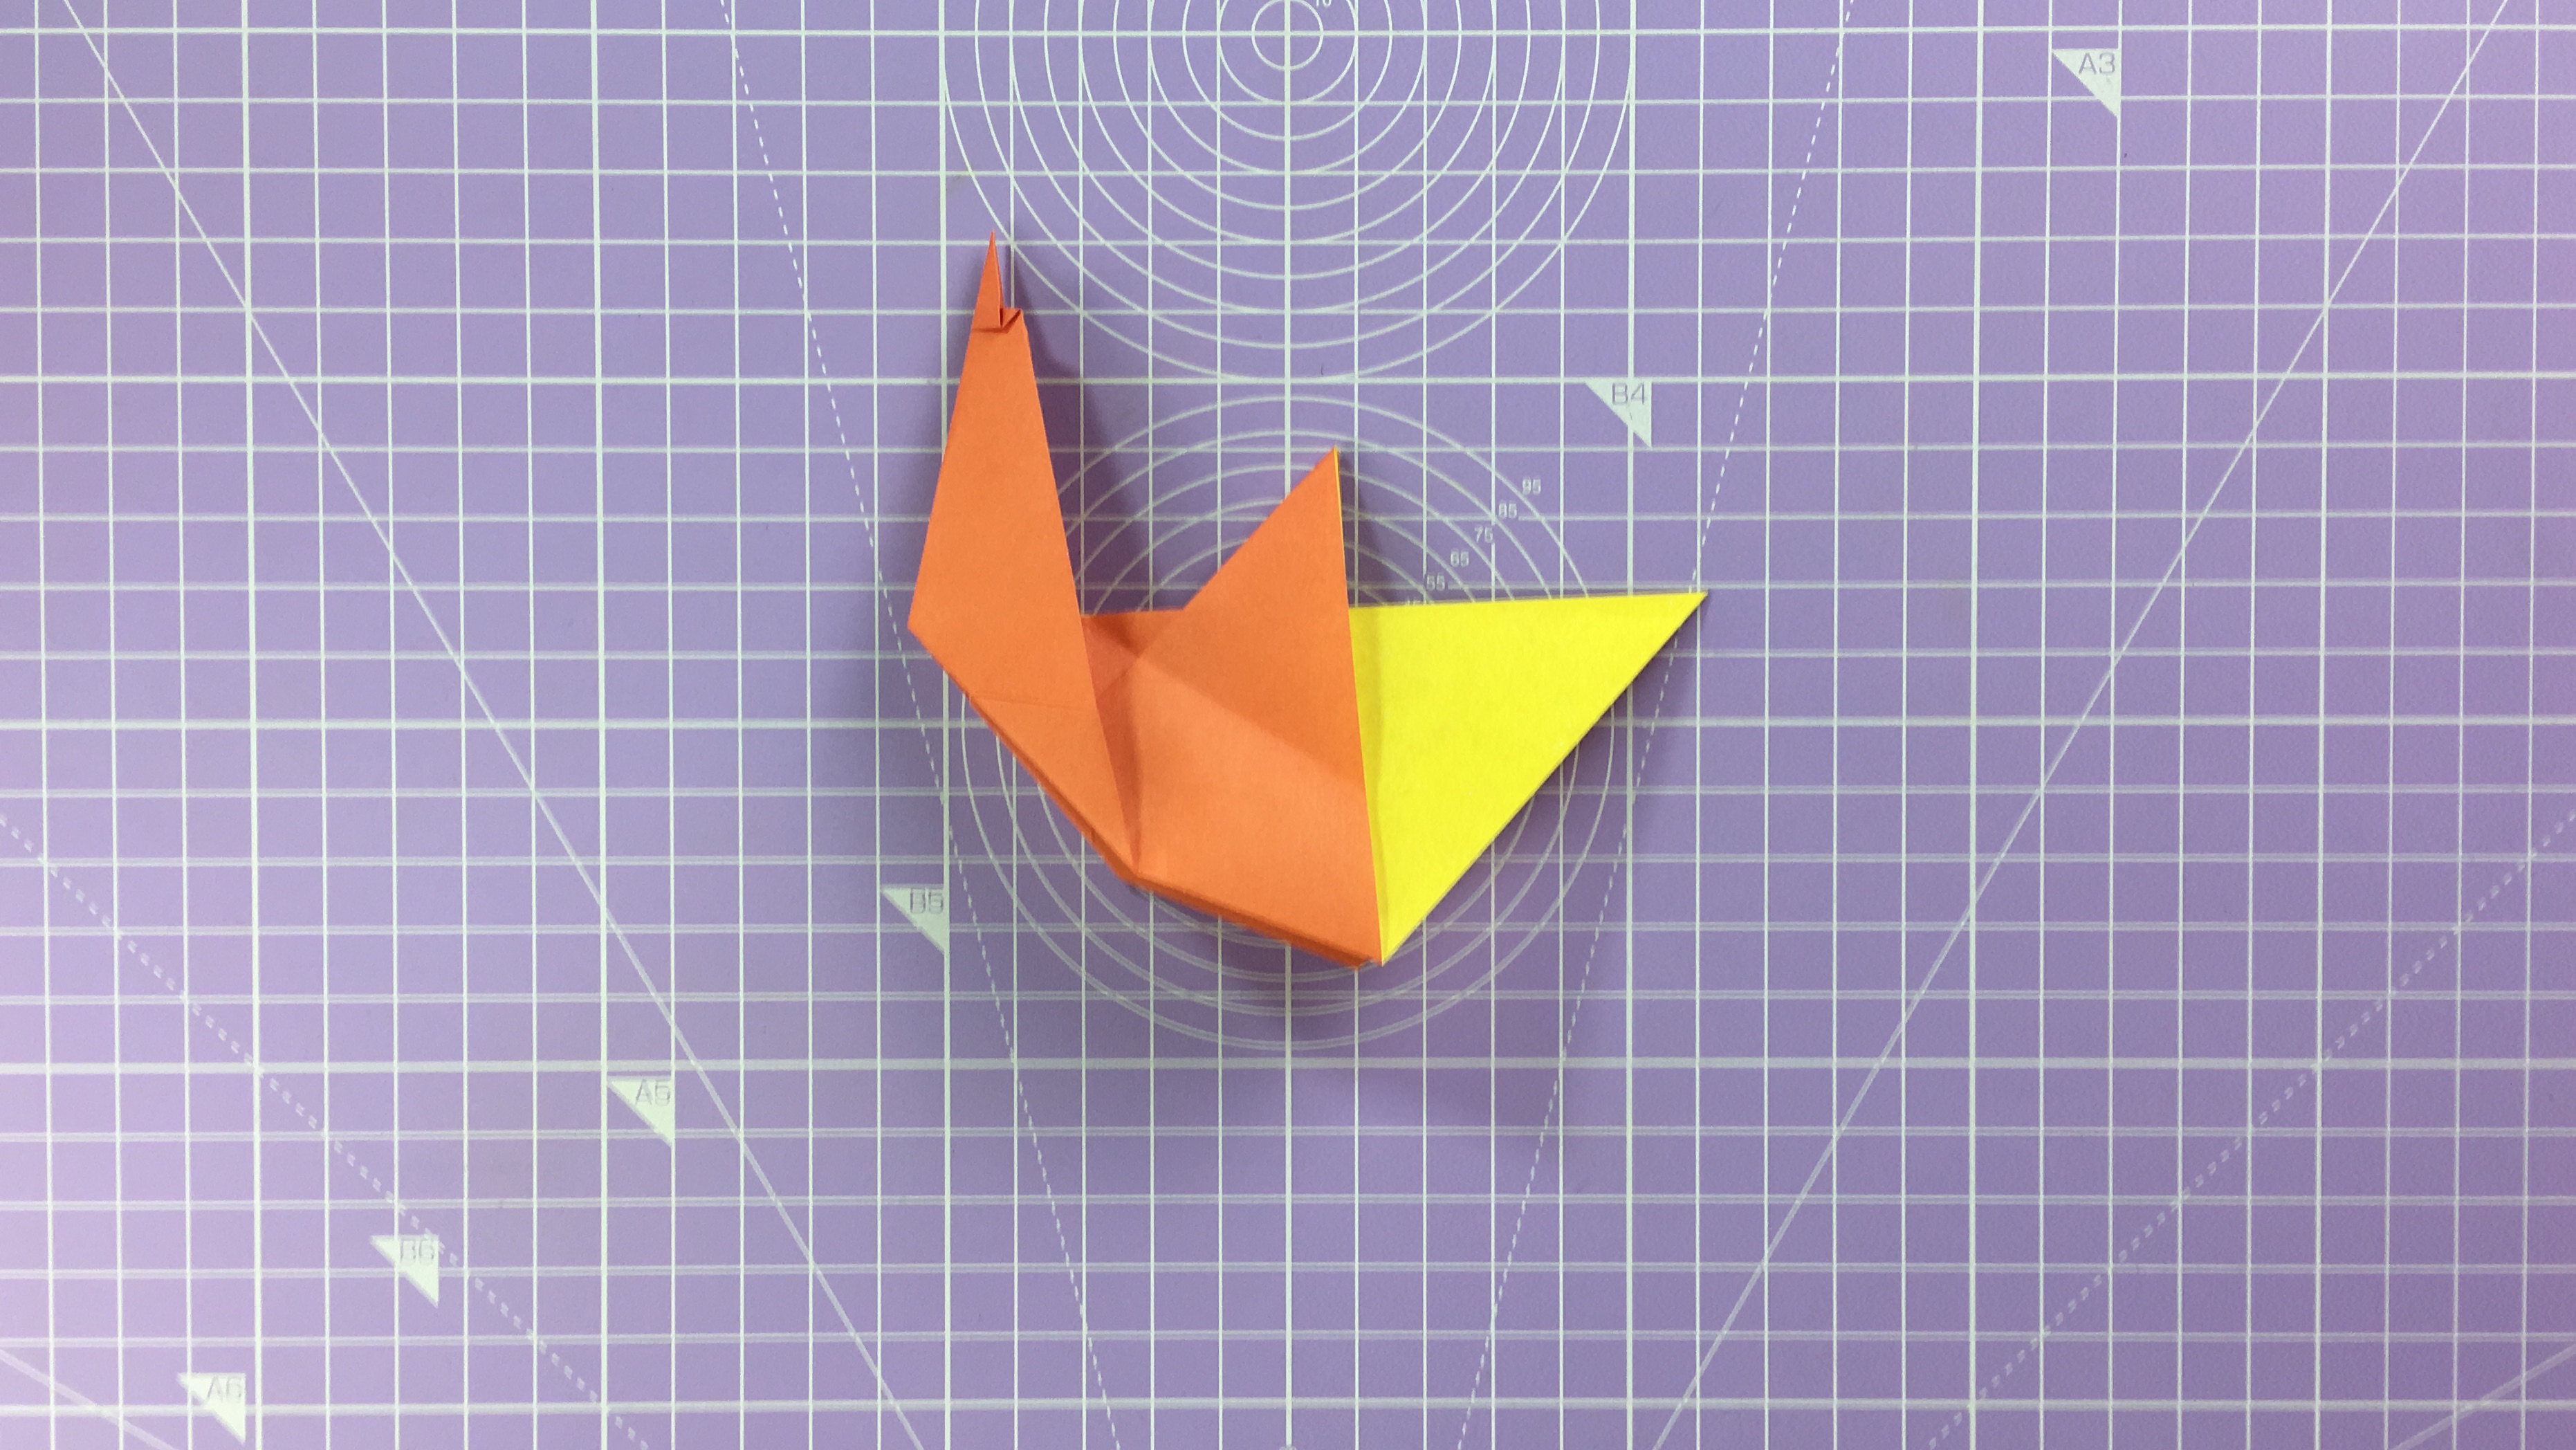 How to make an origami duck - step 12b